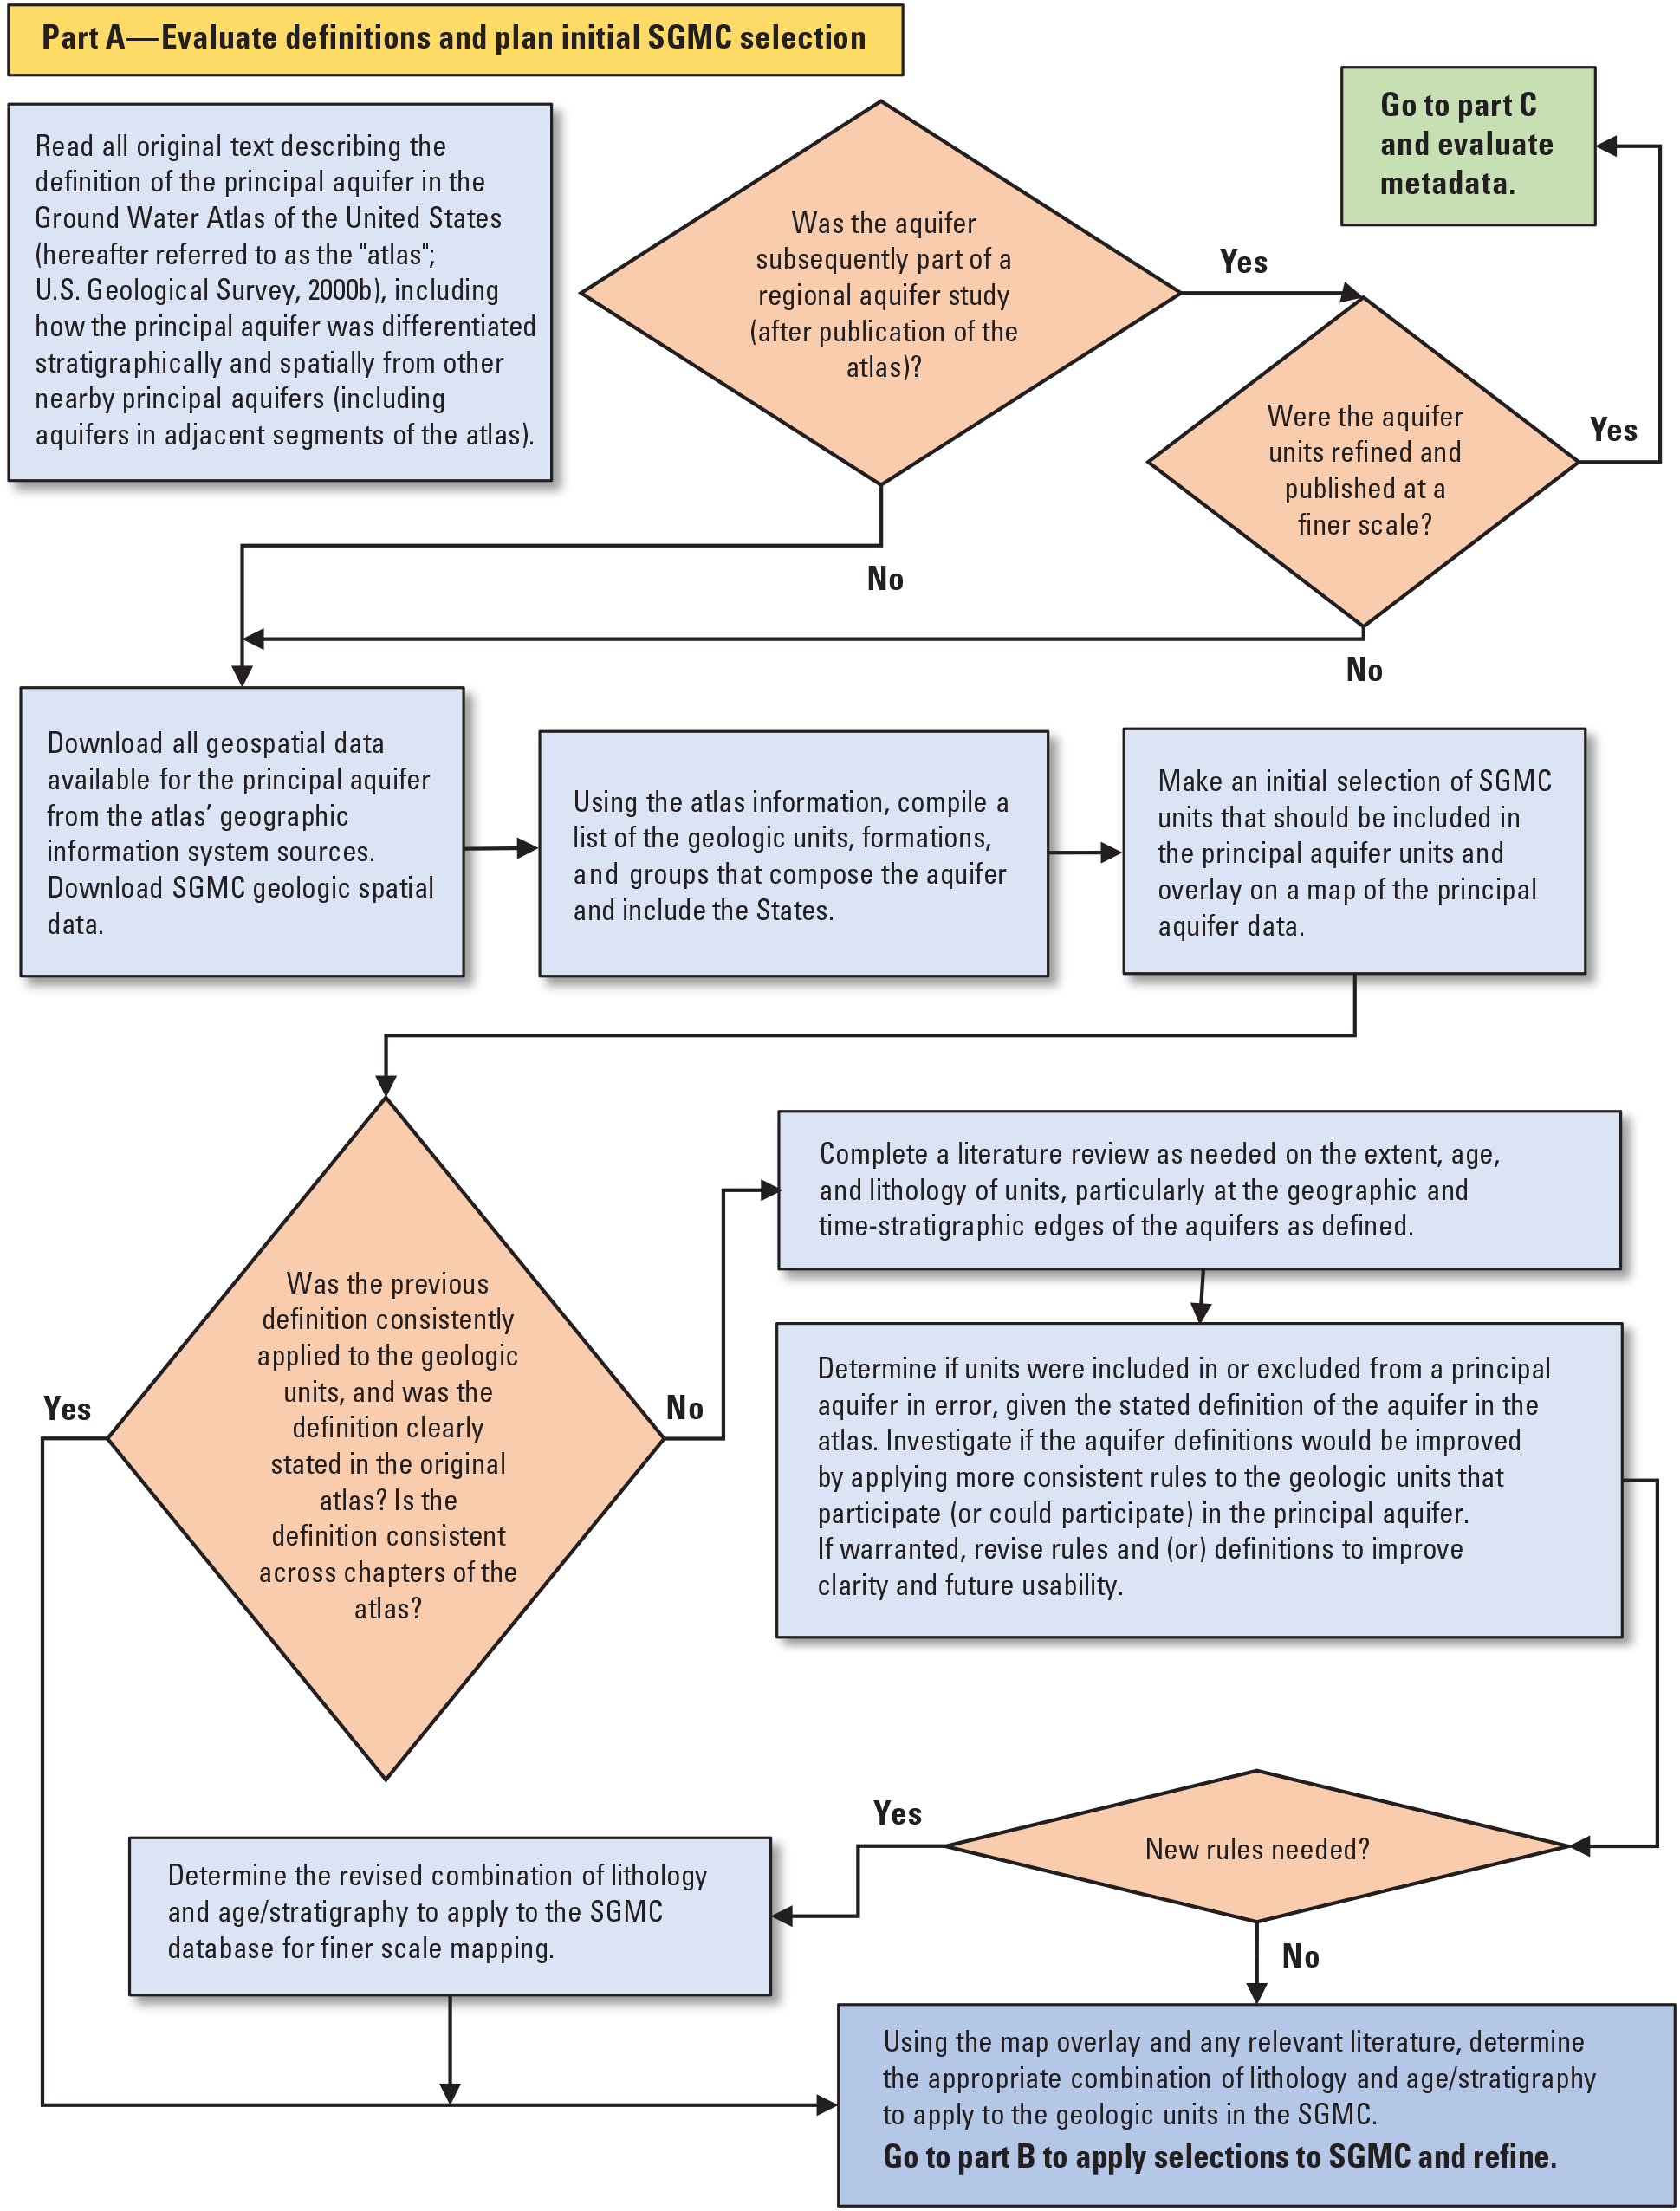 The steps and decision points used in the study.